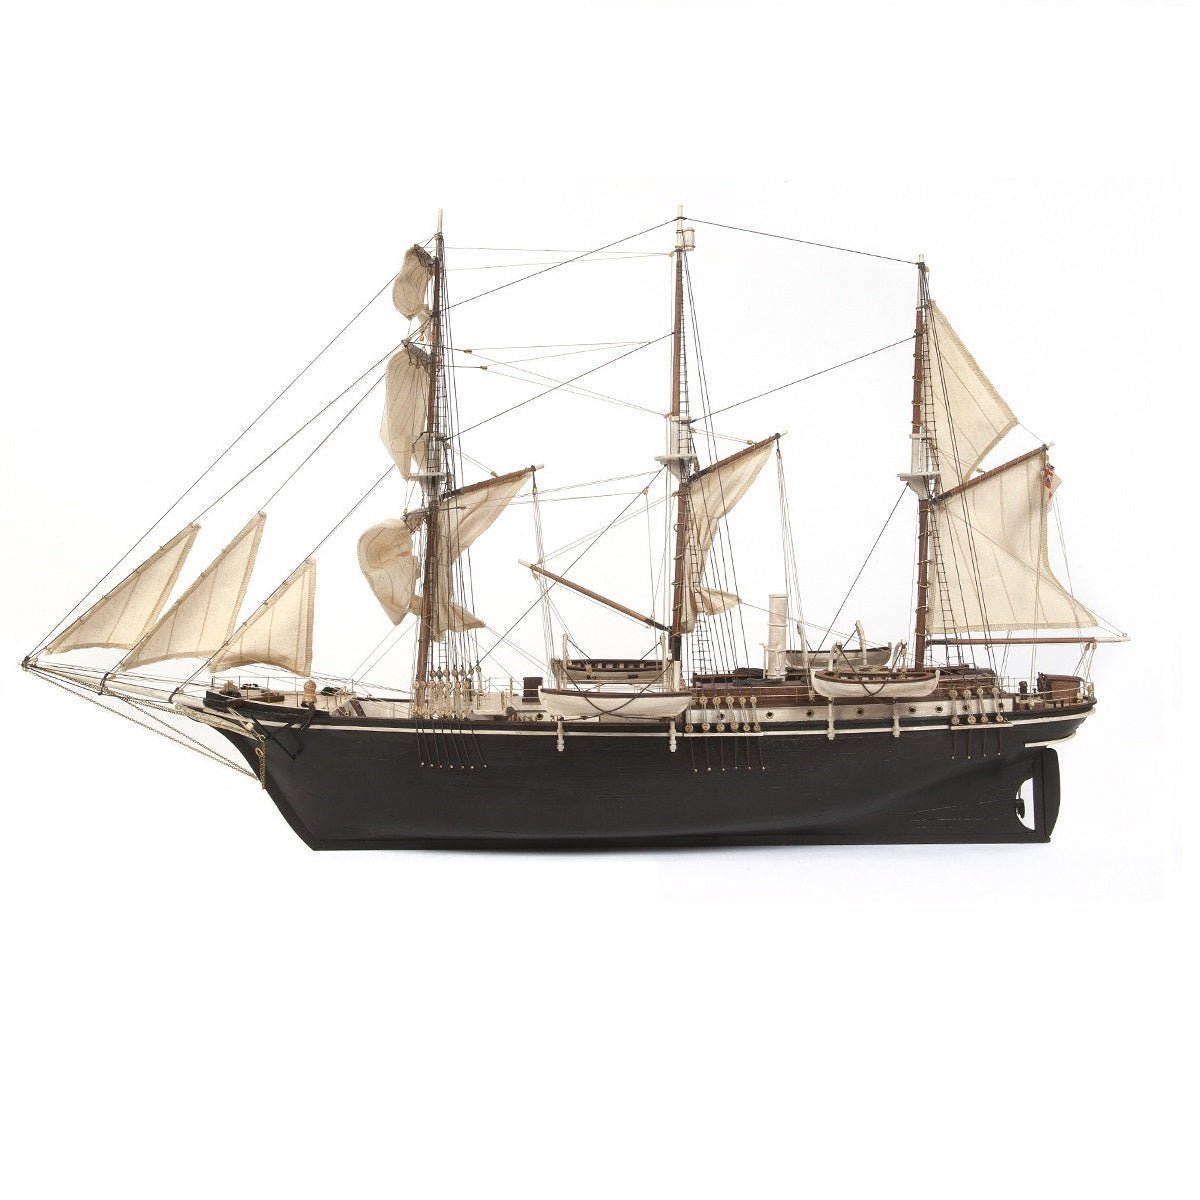 OcCre® Endurance Wooden Ship Kit, 1/70 Scale